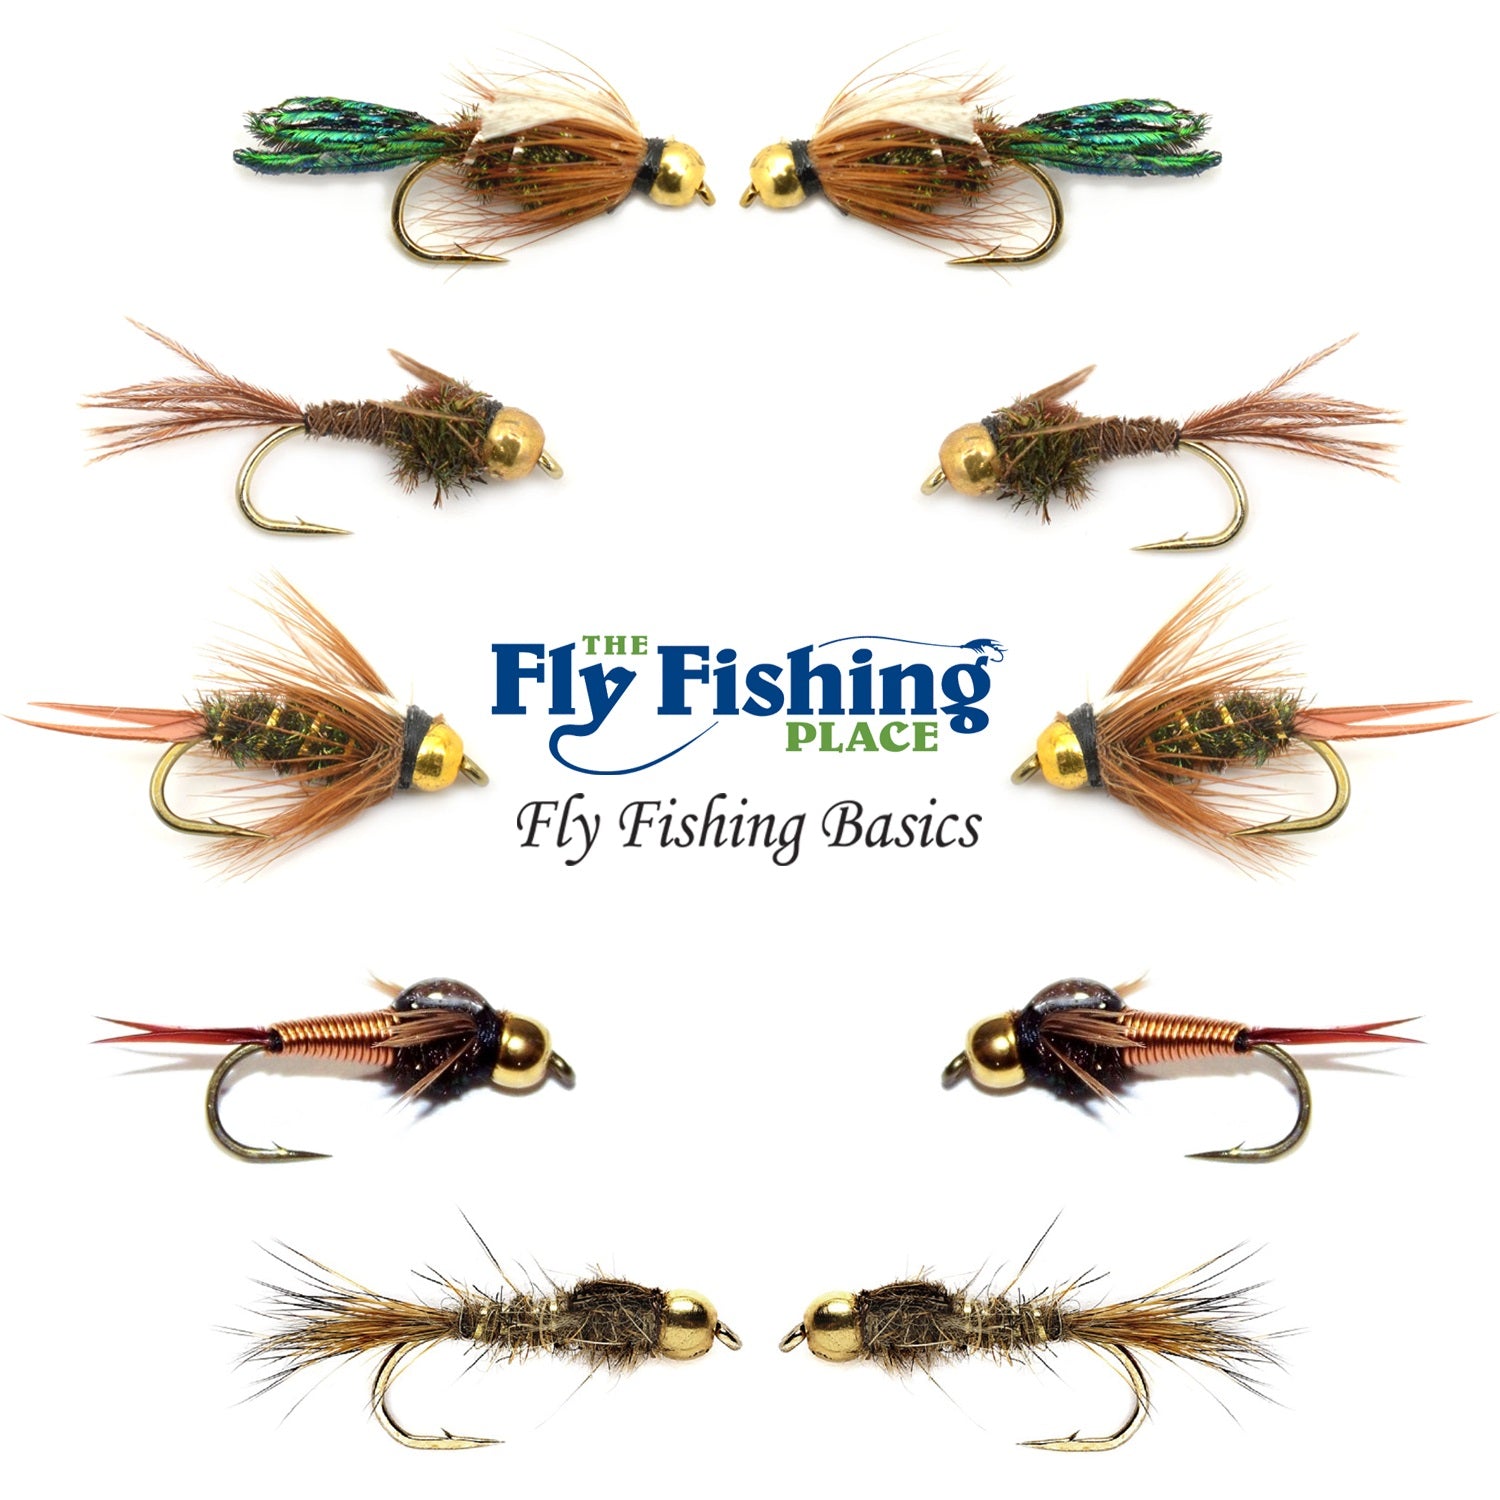 The Fly Fishing Place Bead Head Nymph Fly Fishing Flies - Flashback Gold  Ribbed Hare's Ear Trout Fly - Nymph Wet Fly - 6 Flies Hook Size 12